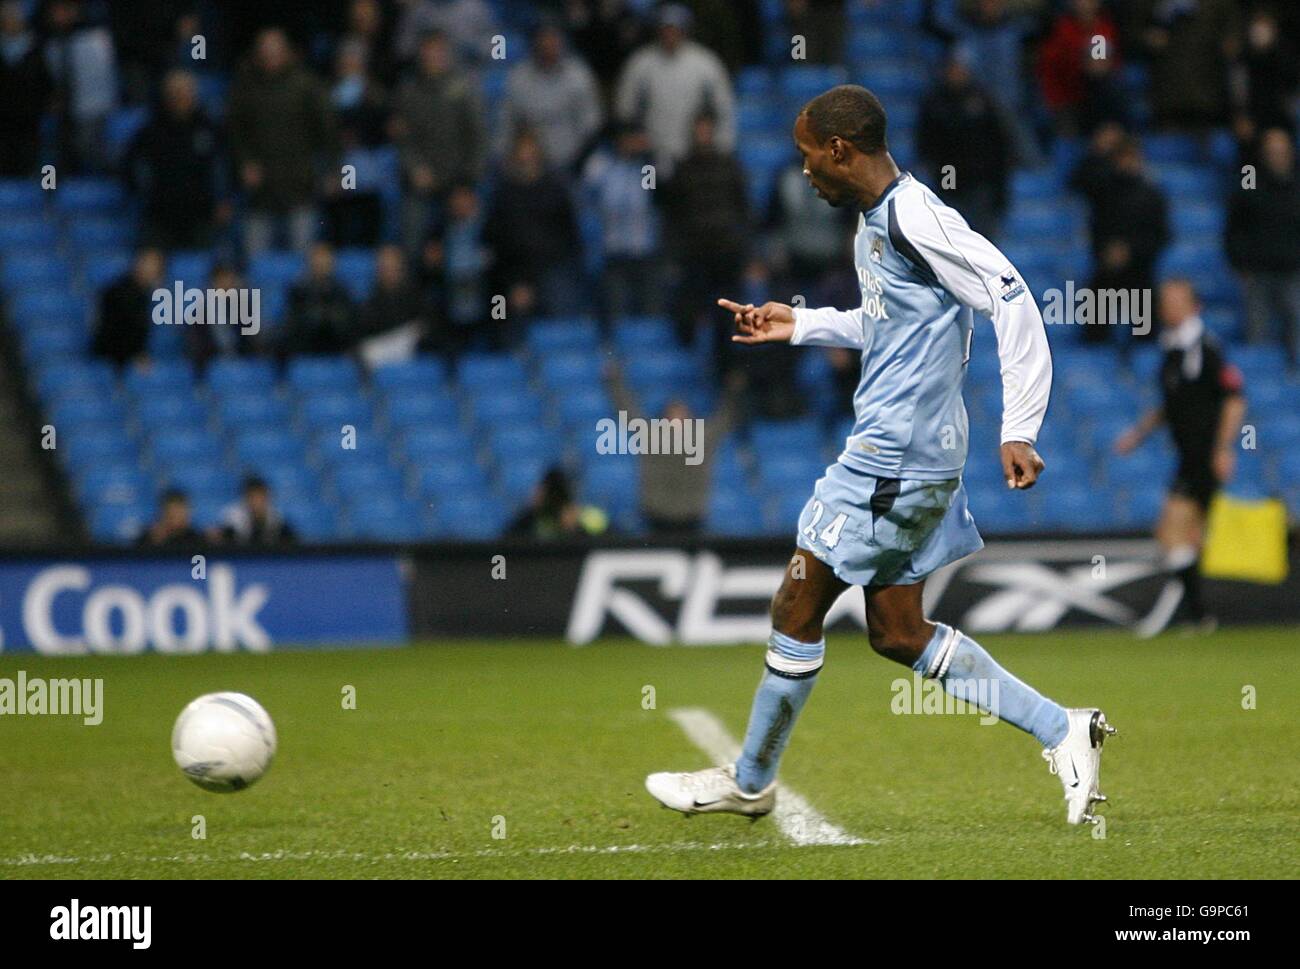 Manchester City's DaMarcus Beasley slots home his sides thrid goal of the match after rounding Southampton goalkeeper Kelvin Davis (not pictured) Stock Photo